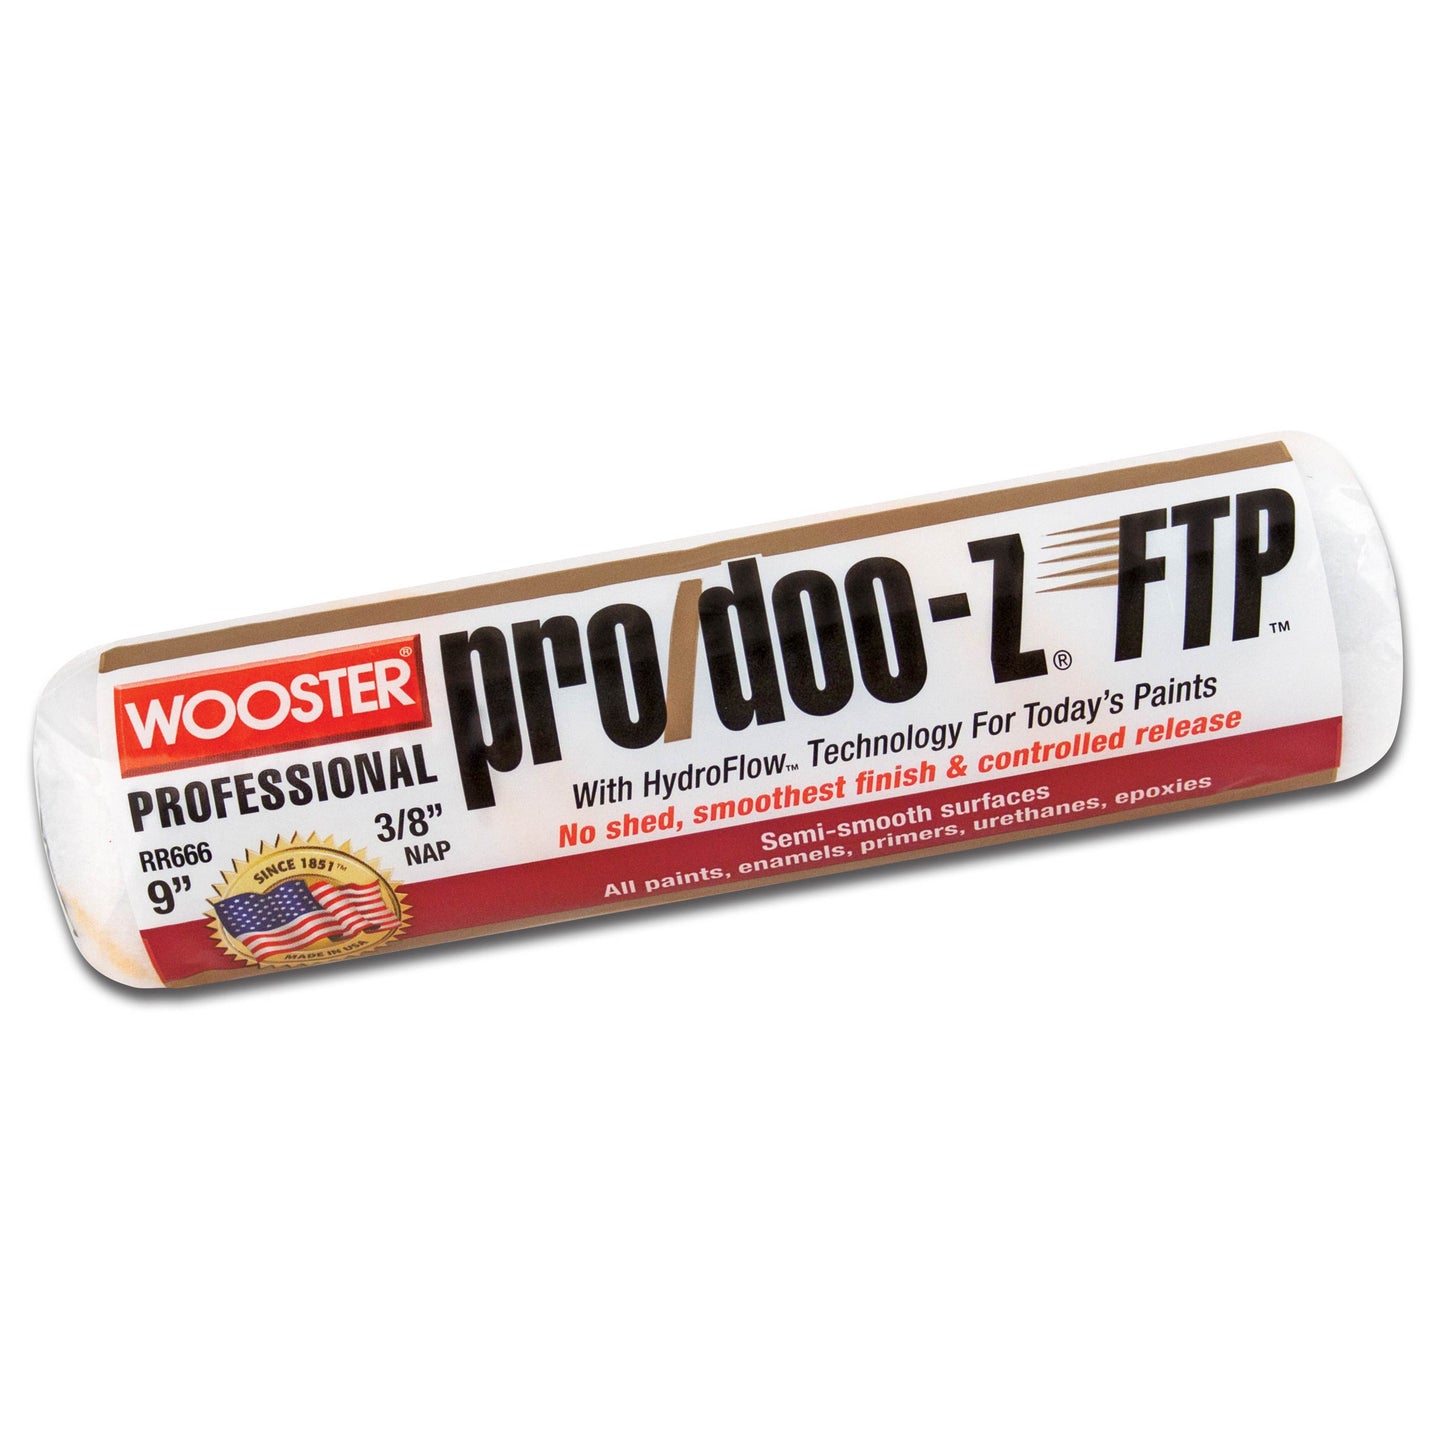 Wooster Pro/Doo-Z FTP Woven Fabric Roller Cover 3/8"